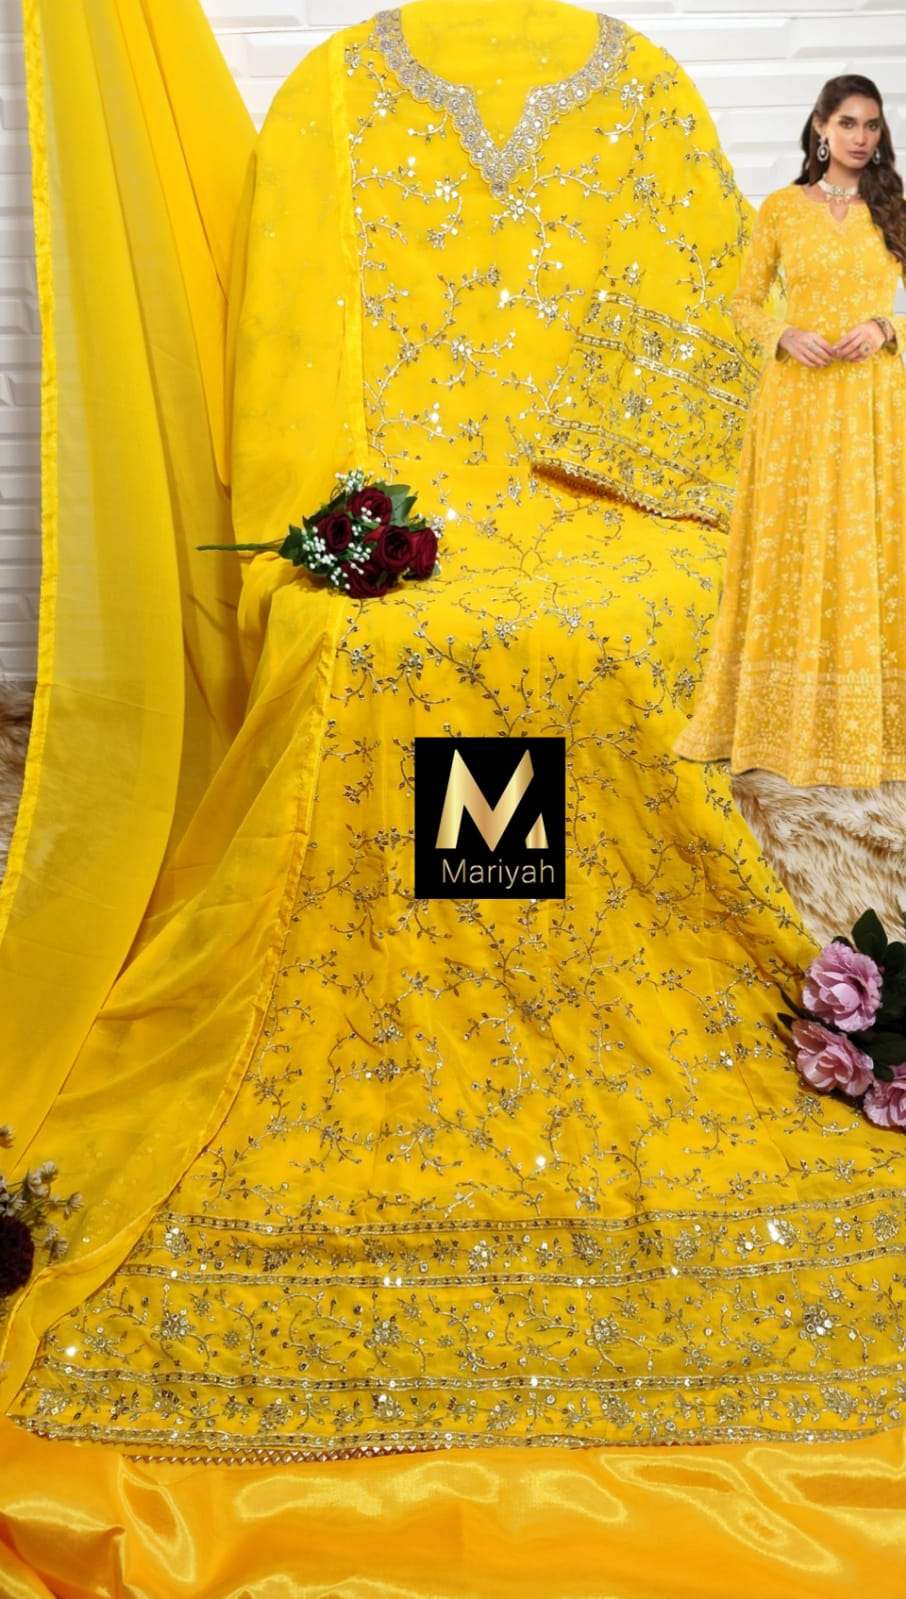 MARIYAH HIT DESIGN M-107 SERIES BY MARIYAH M-107 TO M-110 SERIES BEAUTIFUL ANARKALI SUITS COLORFUL STYLISH FANCY CASUAL WEAR & ETHNIC WEAR HEAVY GEORGETTE DRESSES AT WHOLESALE PRICE